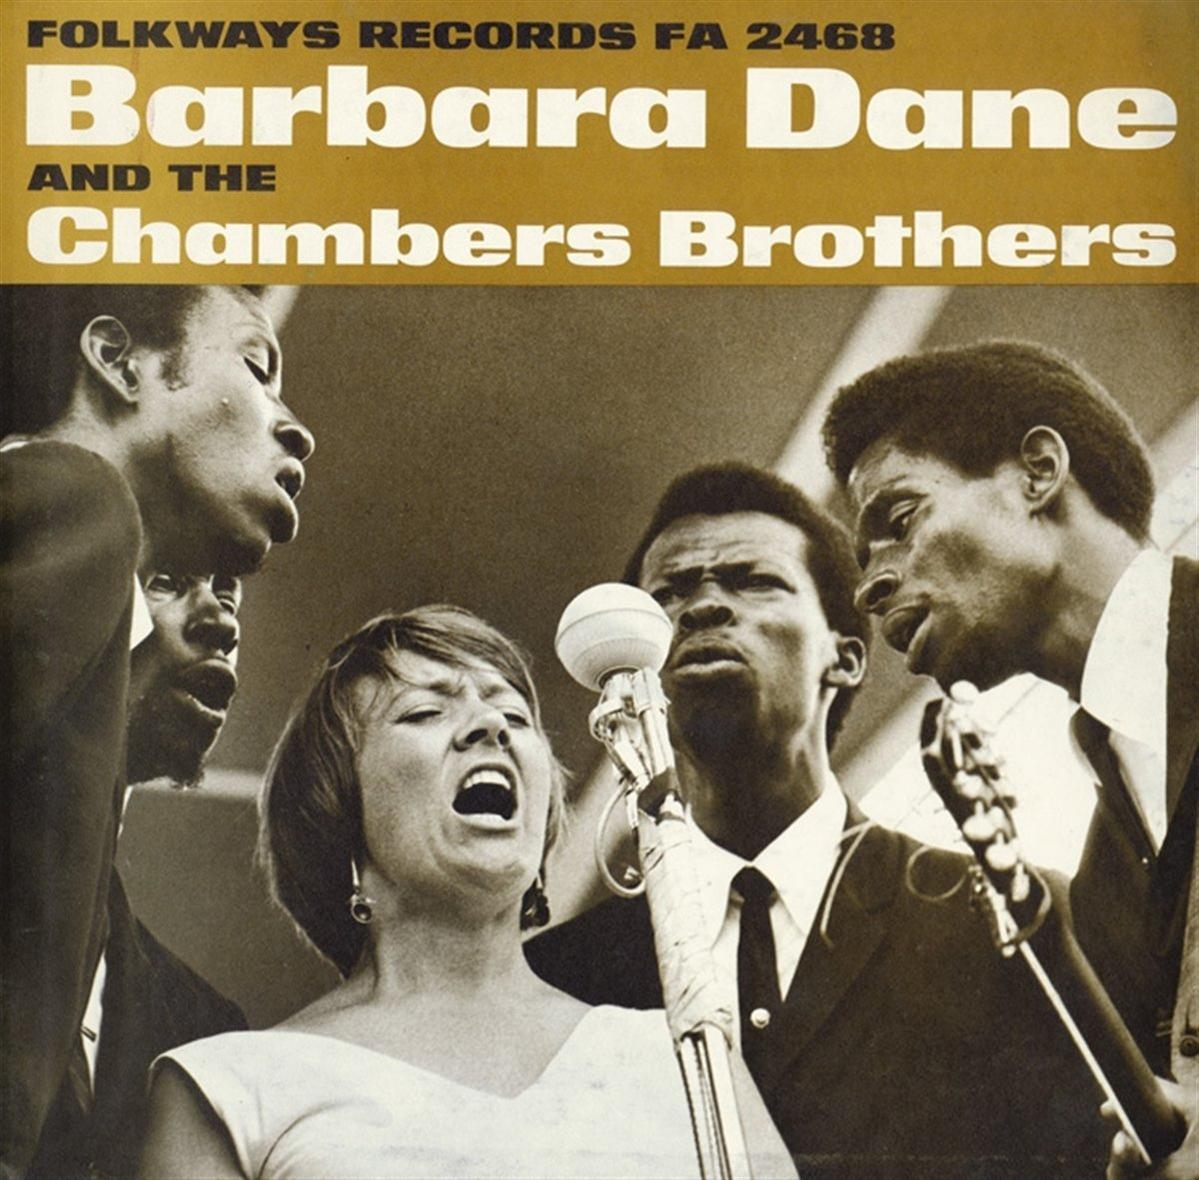 - Brothers Brothers Dane The Chambers And (Vinyl) Chambers The - Barbara And